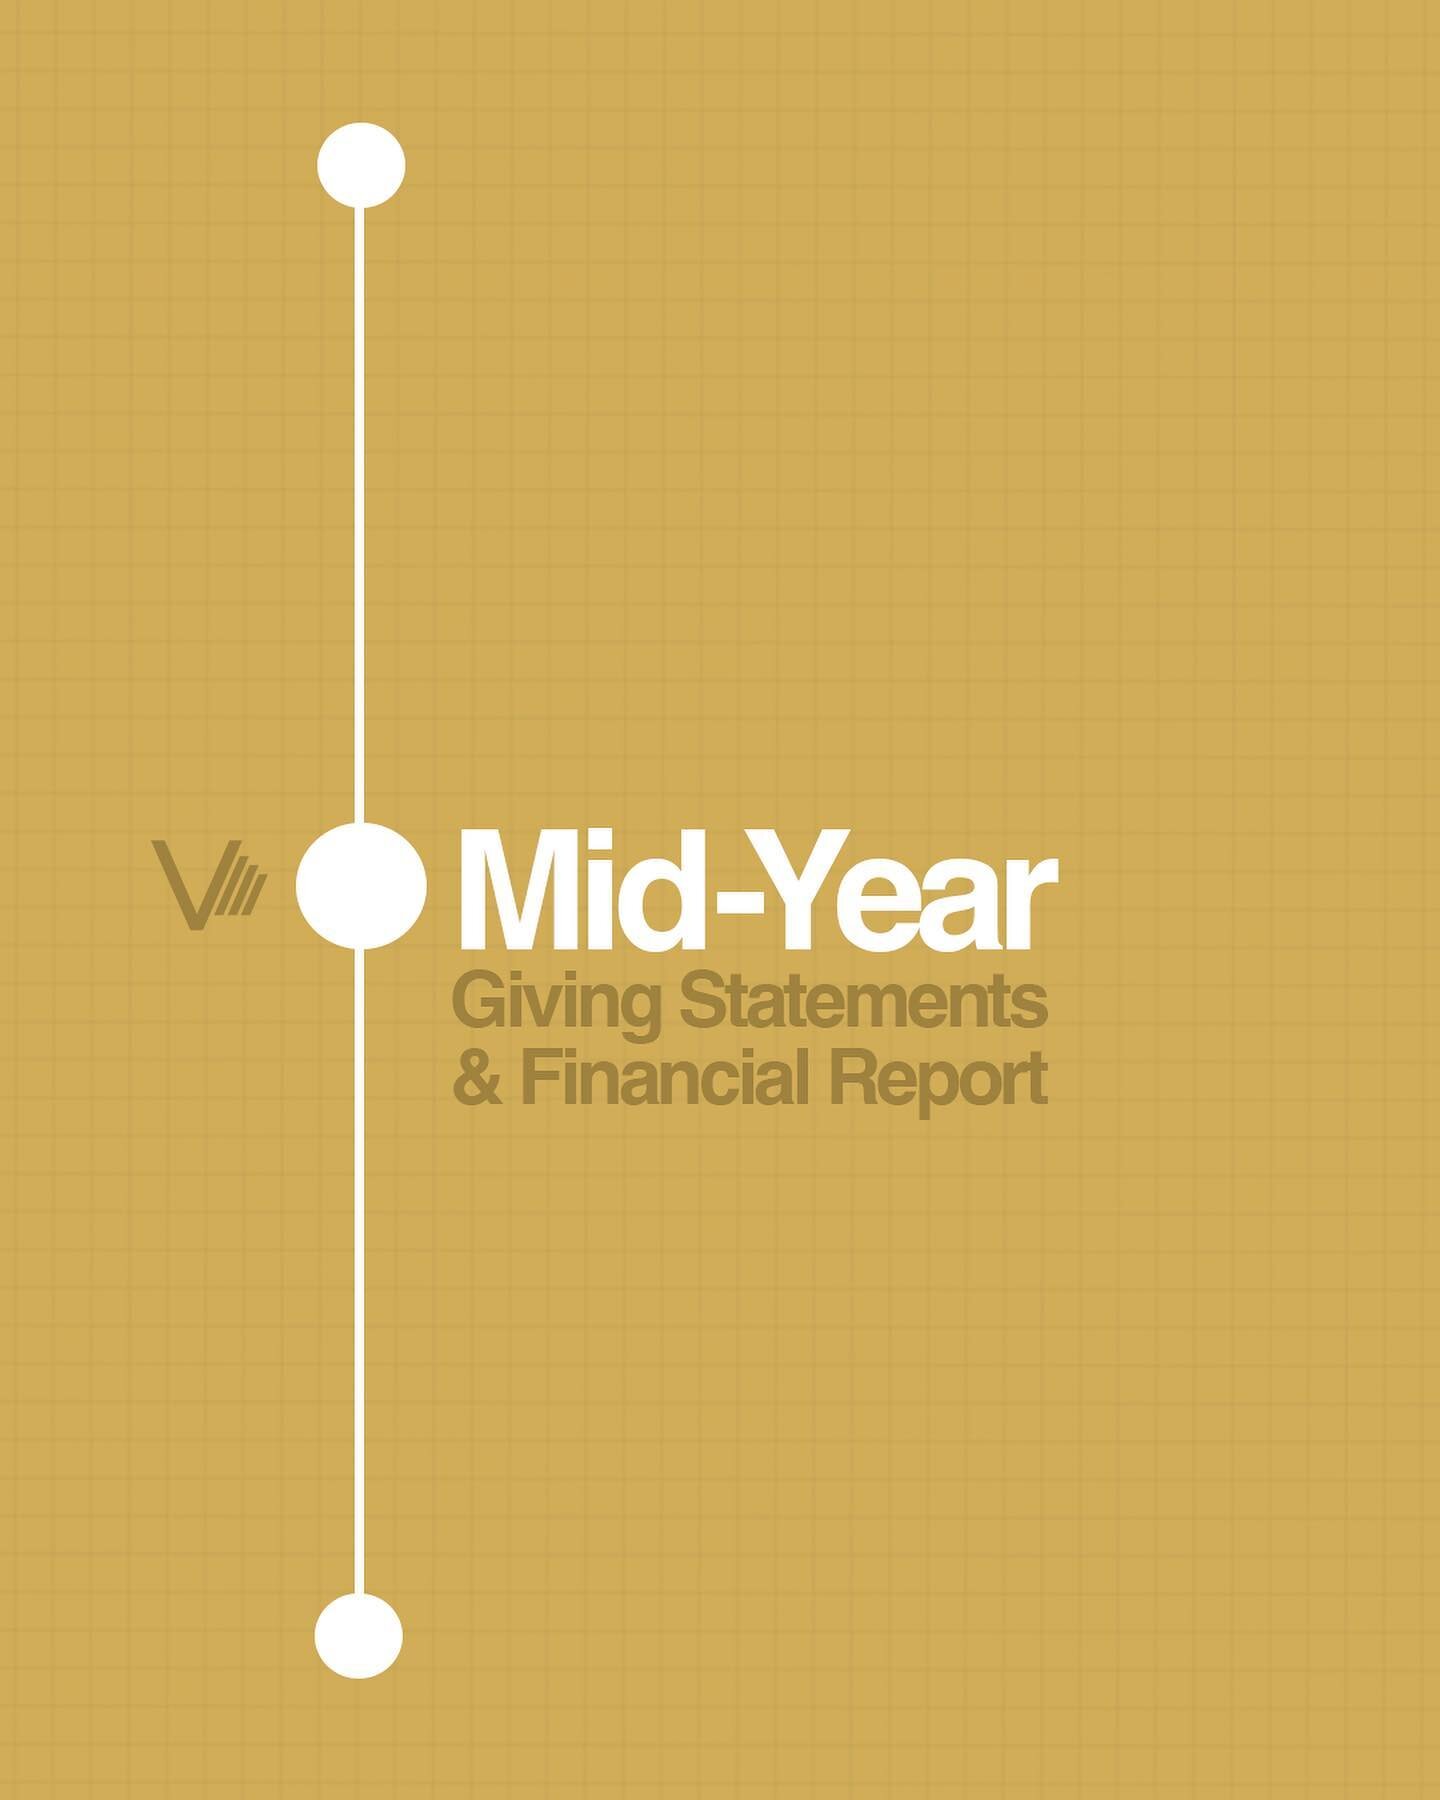 Our Mid-Year Giving Statement and Financial Report is available now.

If you haven&rsquo;t received it via our newsletter, please email us at contact@valleybiblechurch.com

Or visit us at valleybiblechurch.com